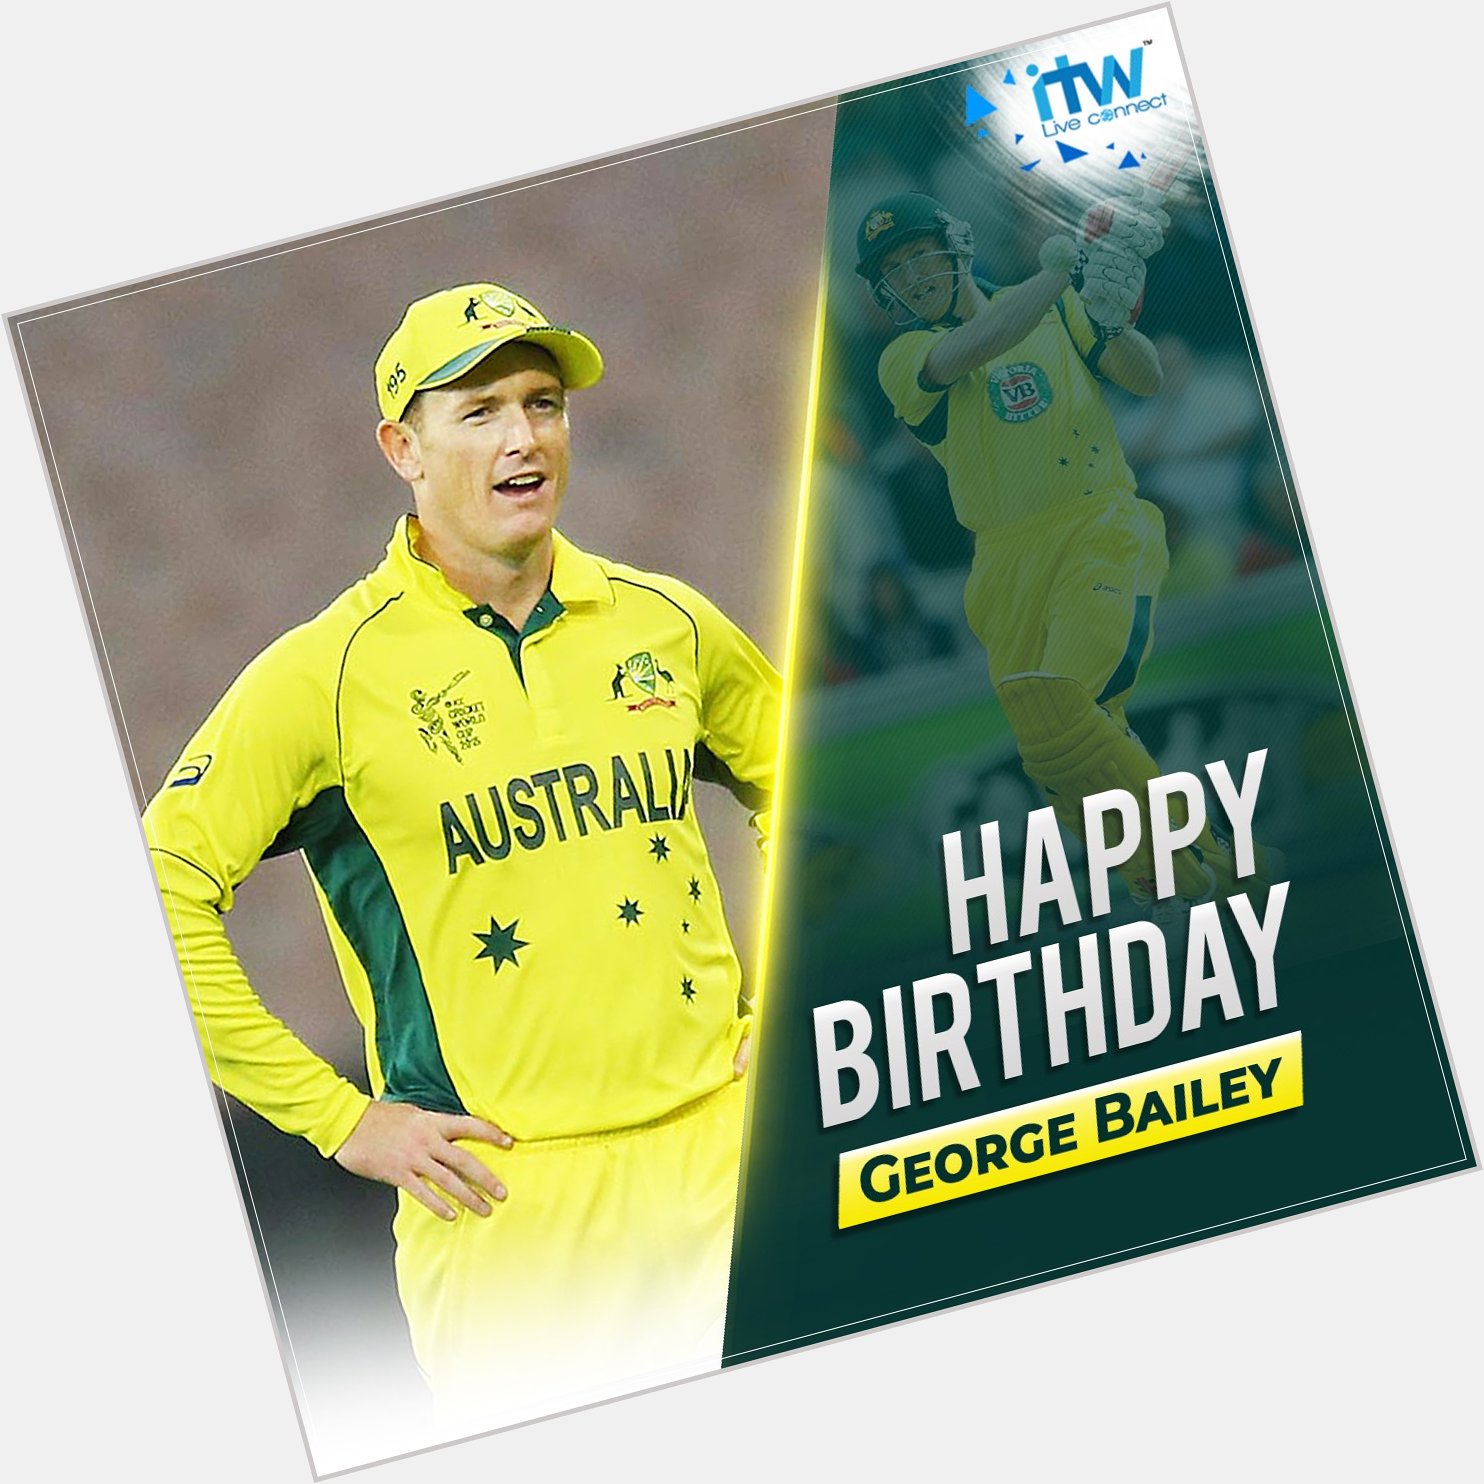 Wishing former skipper George Bailey a very Happy Birthday as he turns 36 today. 